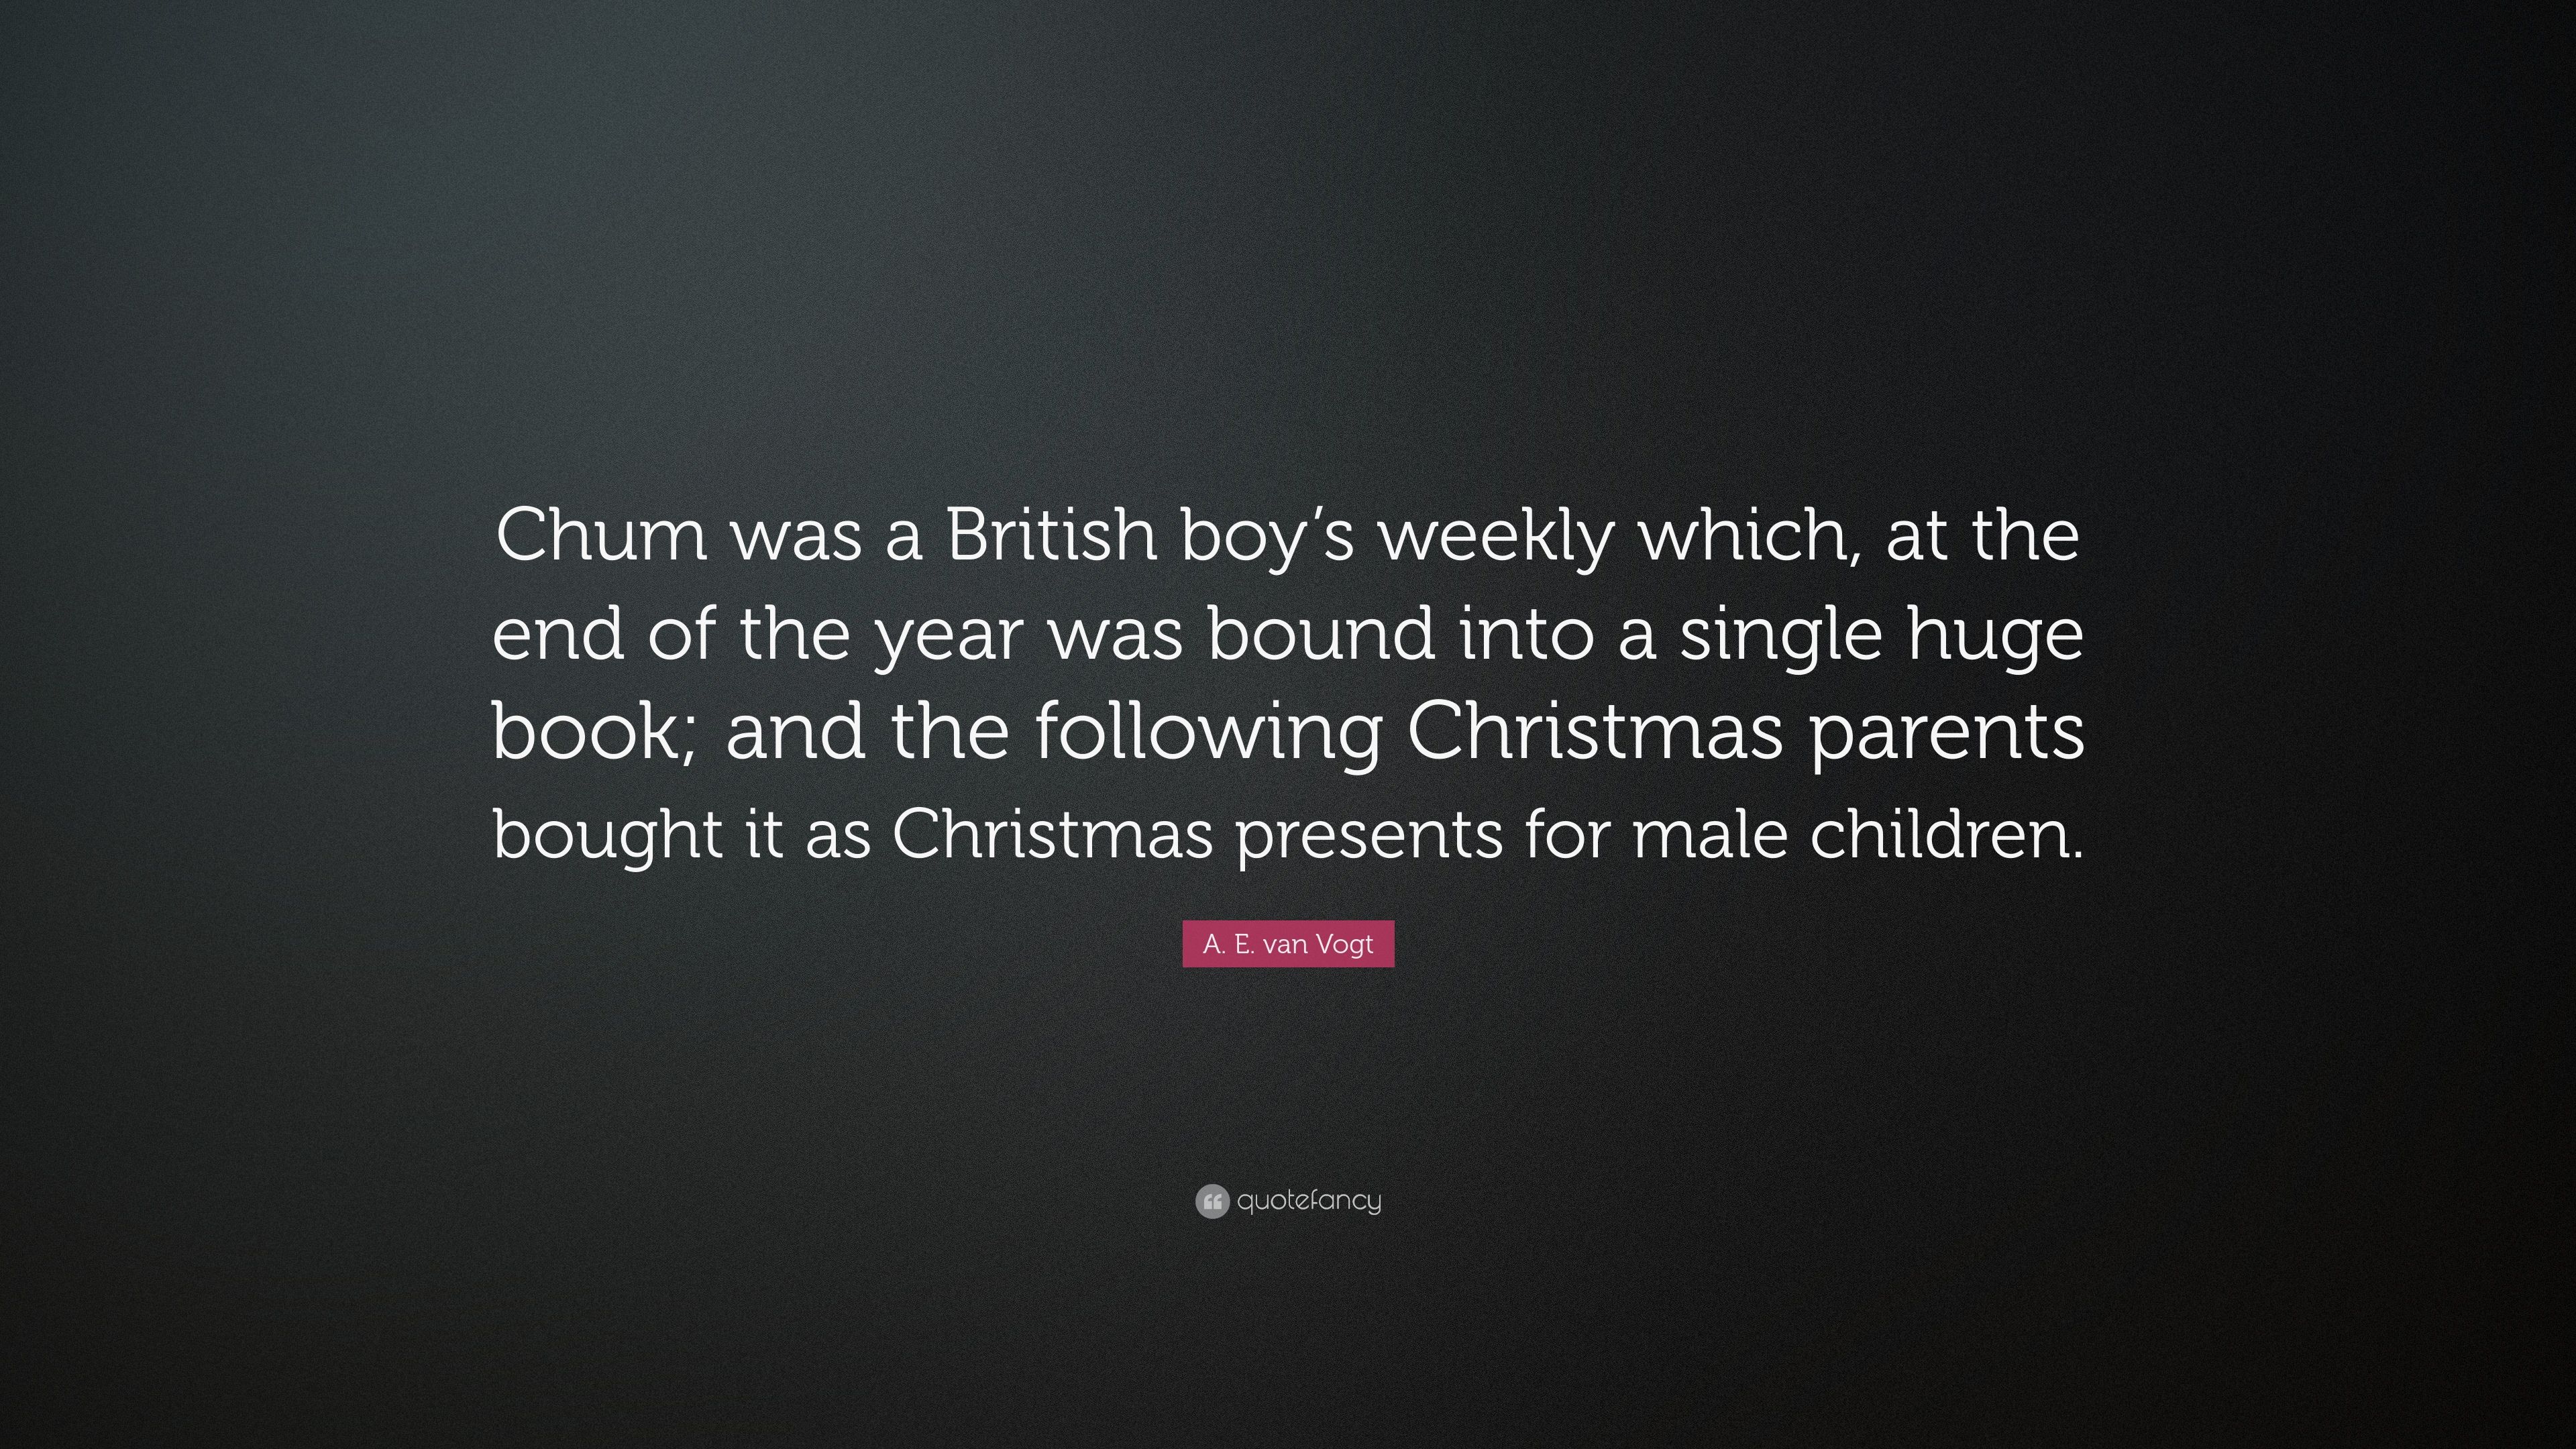 A. E. van Vogt Quote: “Chum was a British boy's weekly which, at